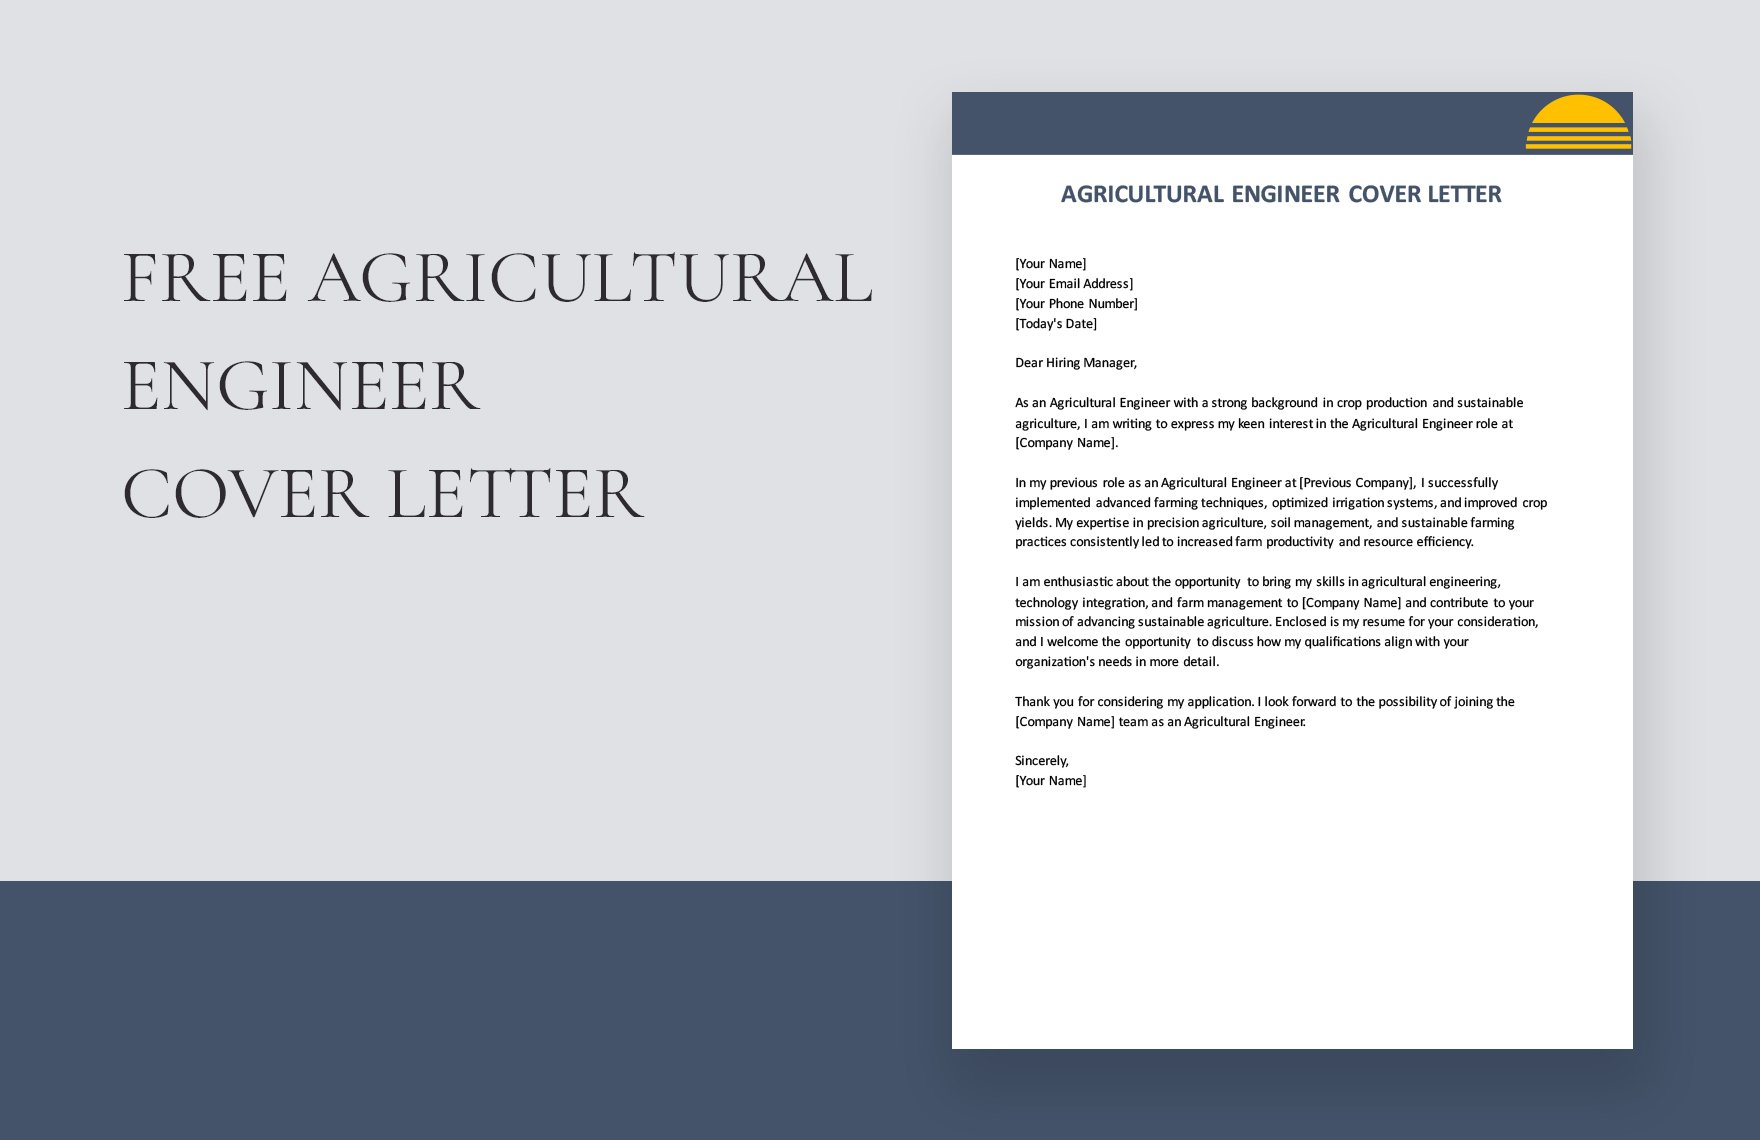 Agricultural Engineer Cover Letter in Word, Google Docs, PDF